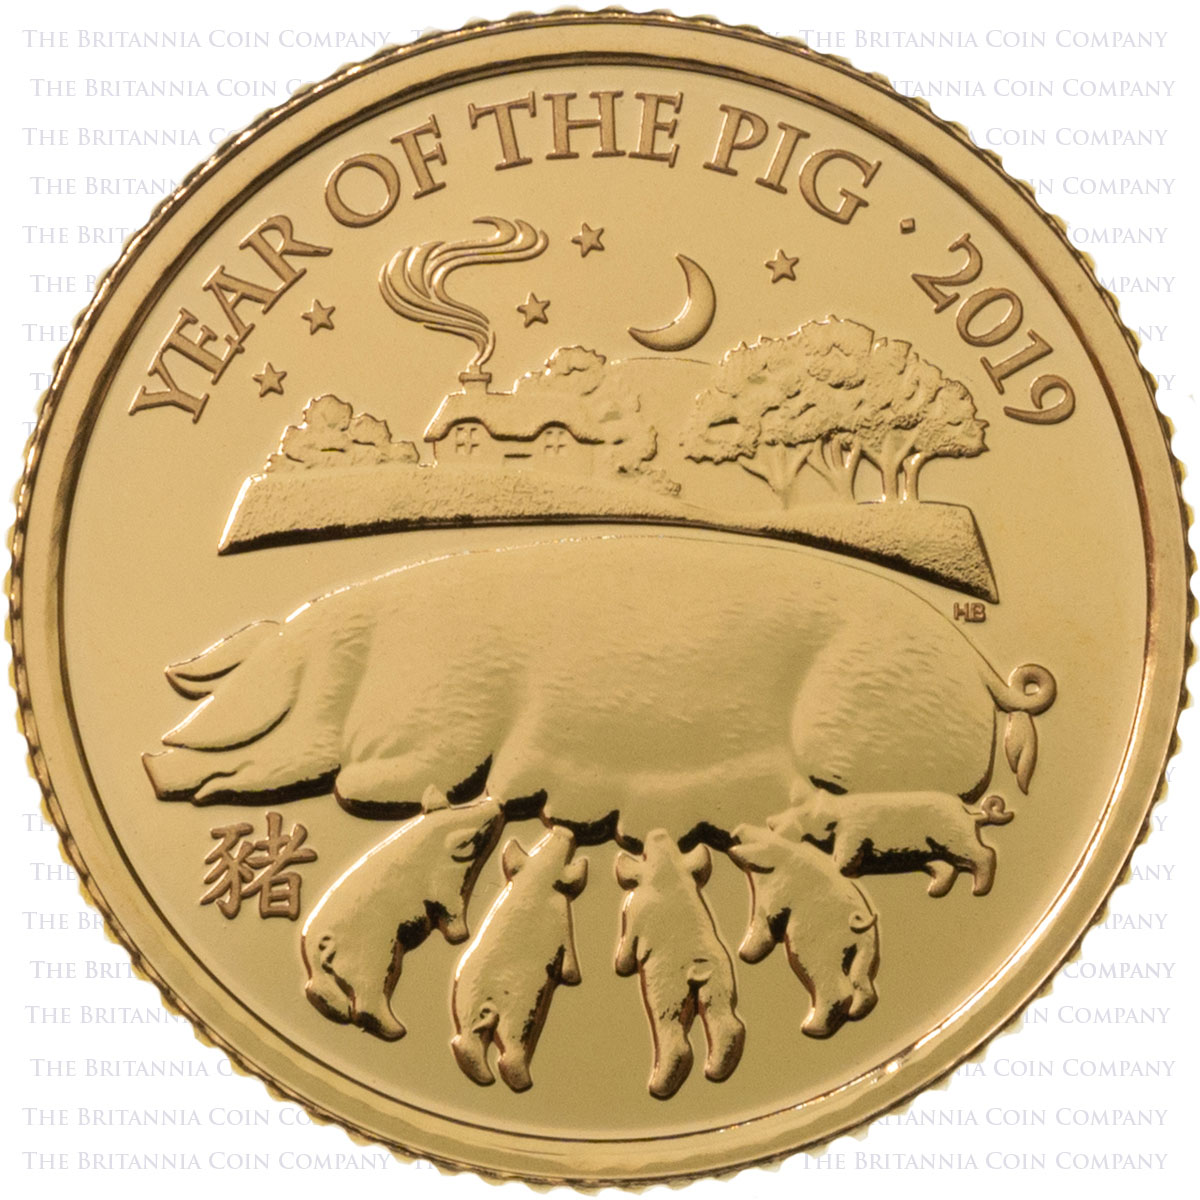 UKP19GT 2019 Lunar Year Of The Pig Tenth Ounce Gold Brilliant Uncirculated Coin Reverse